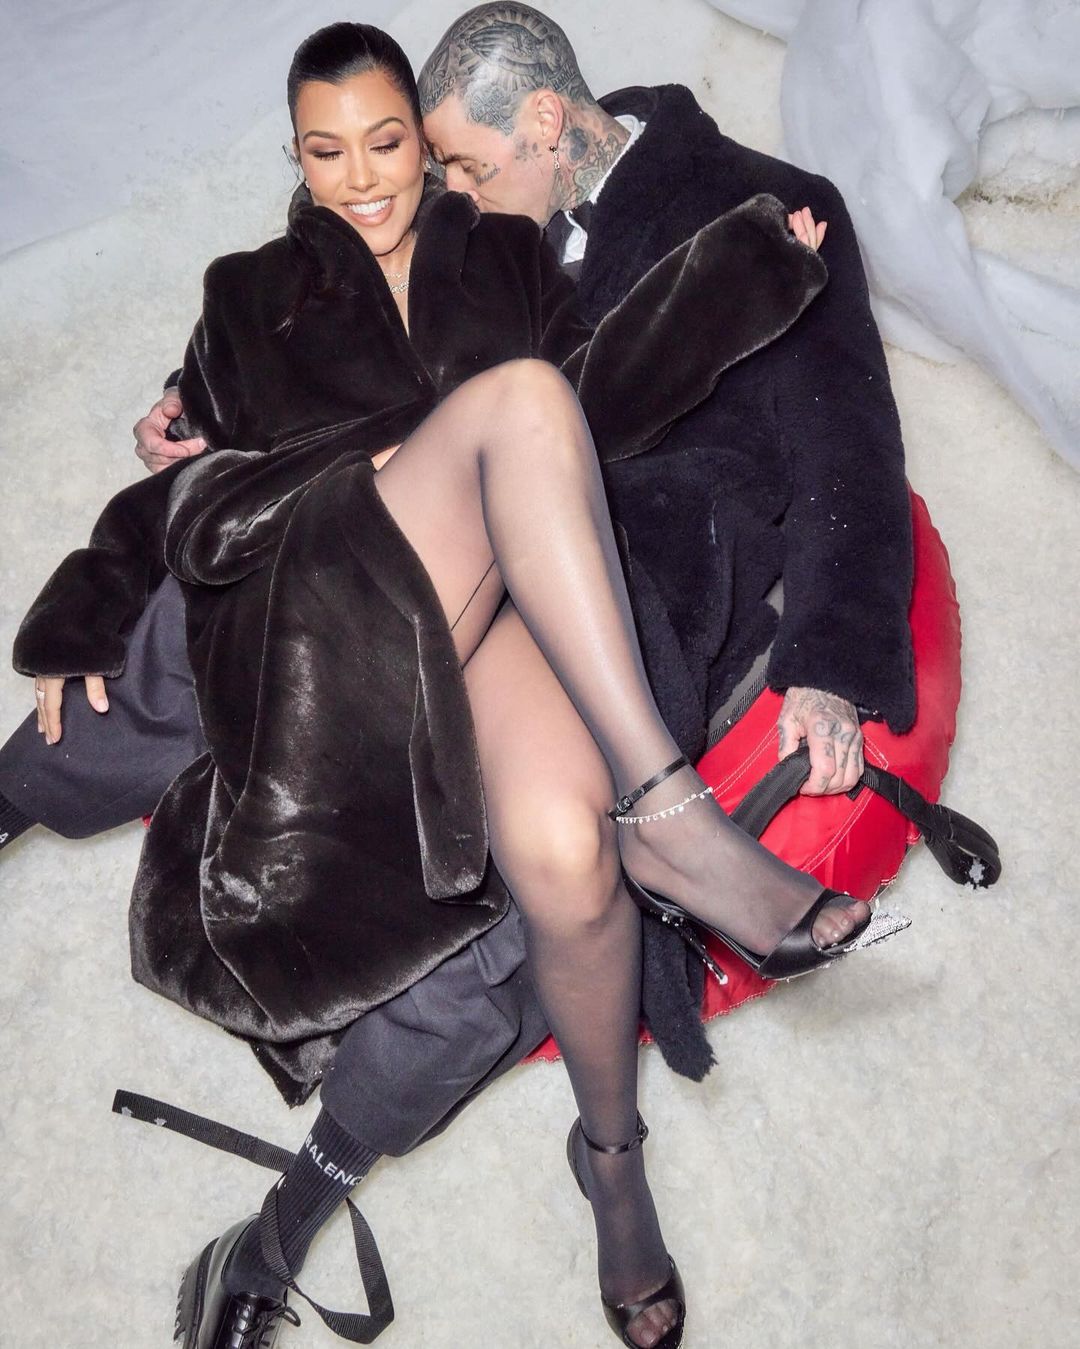 Kourtney's latest photo dump featured pics of her sitting on Travis' lap in a snow tube